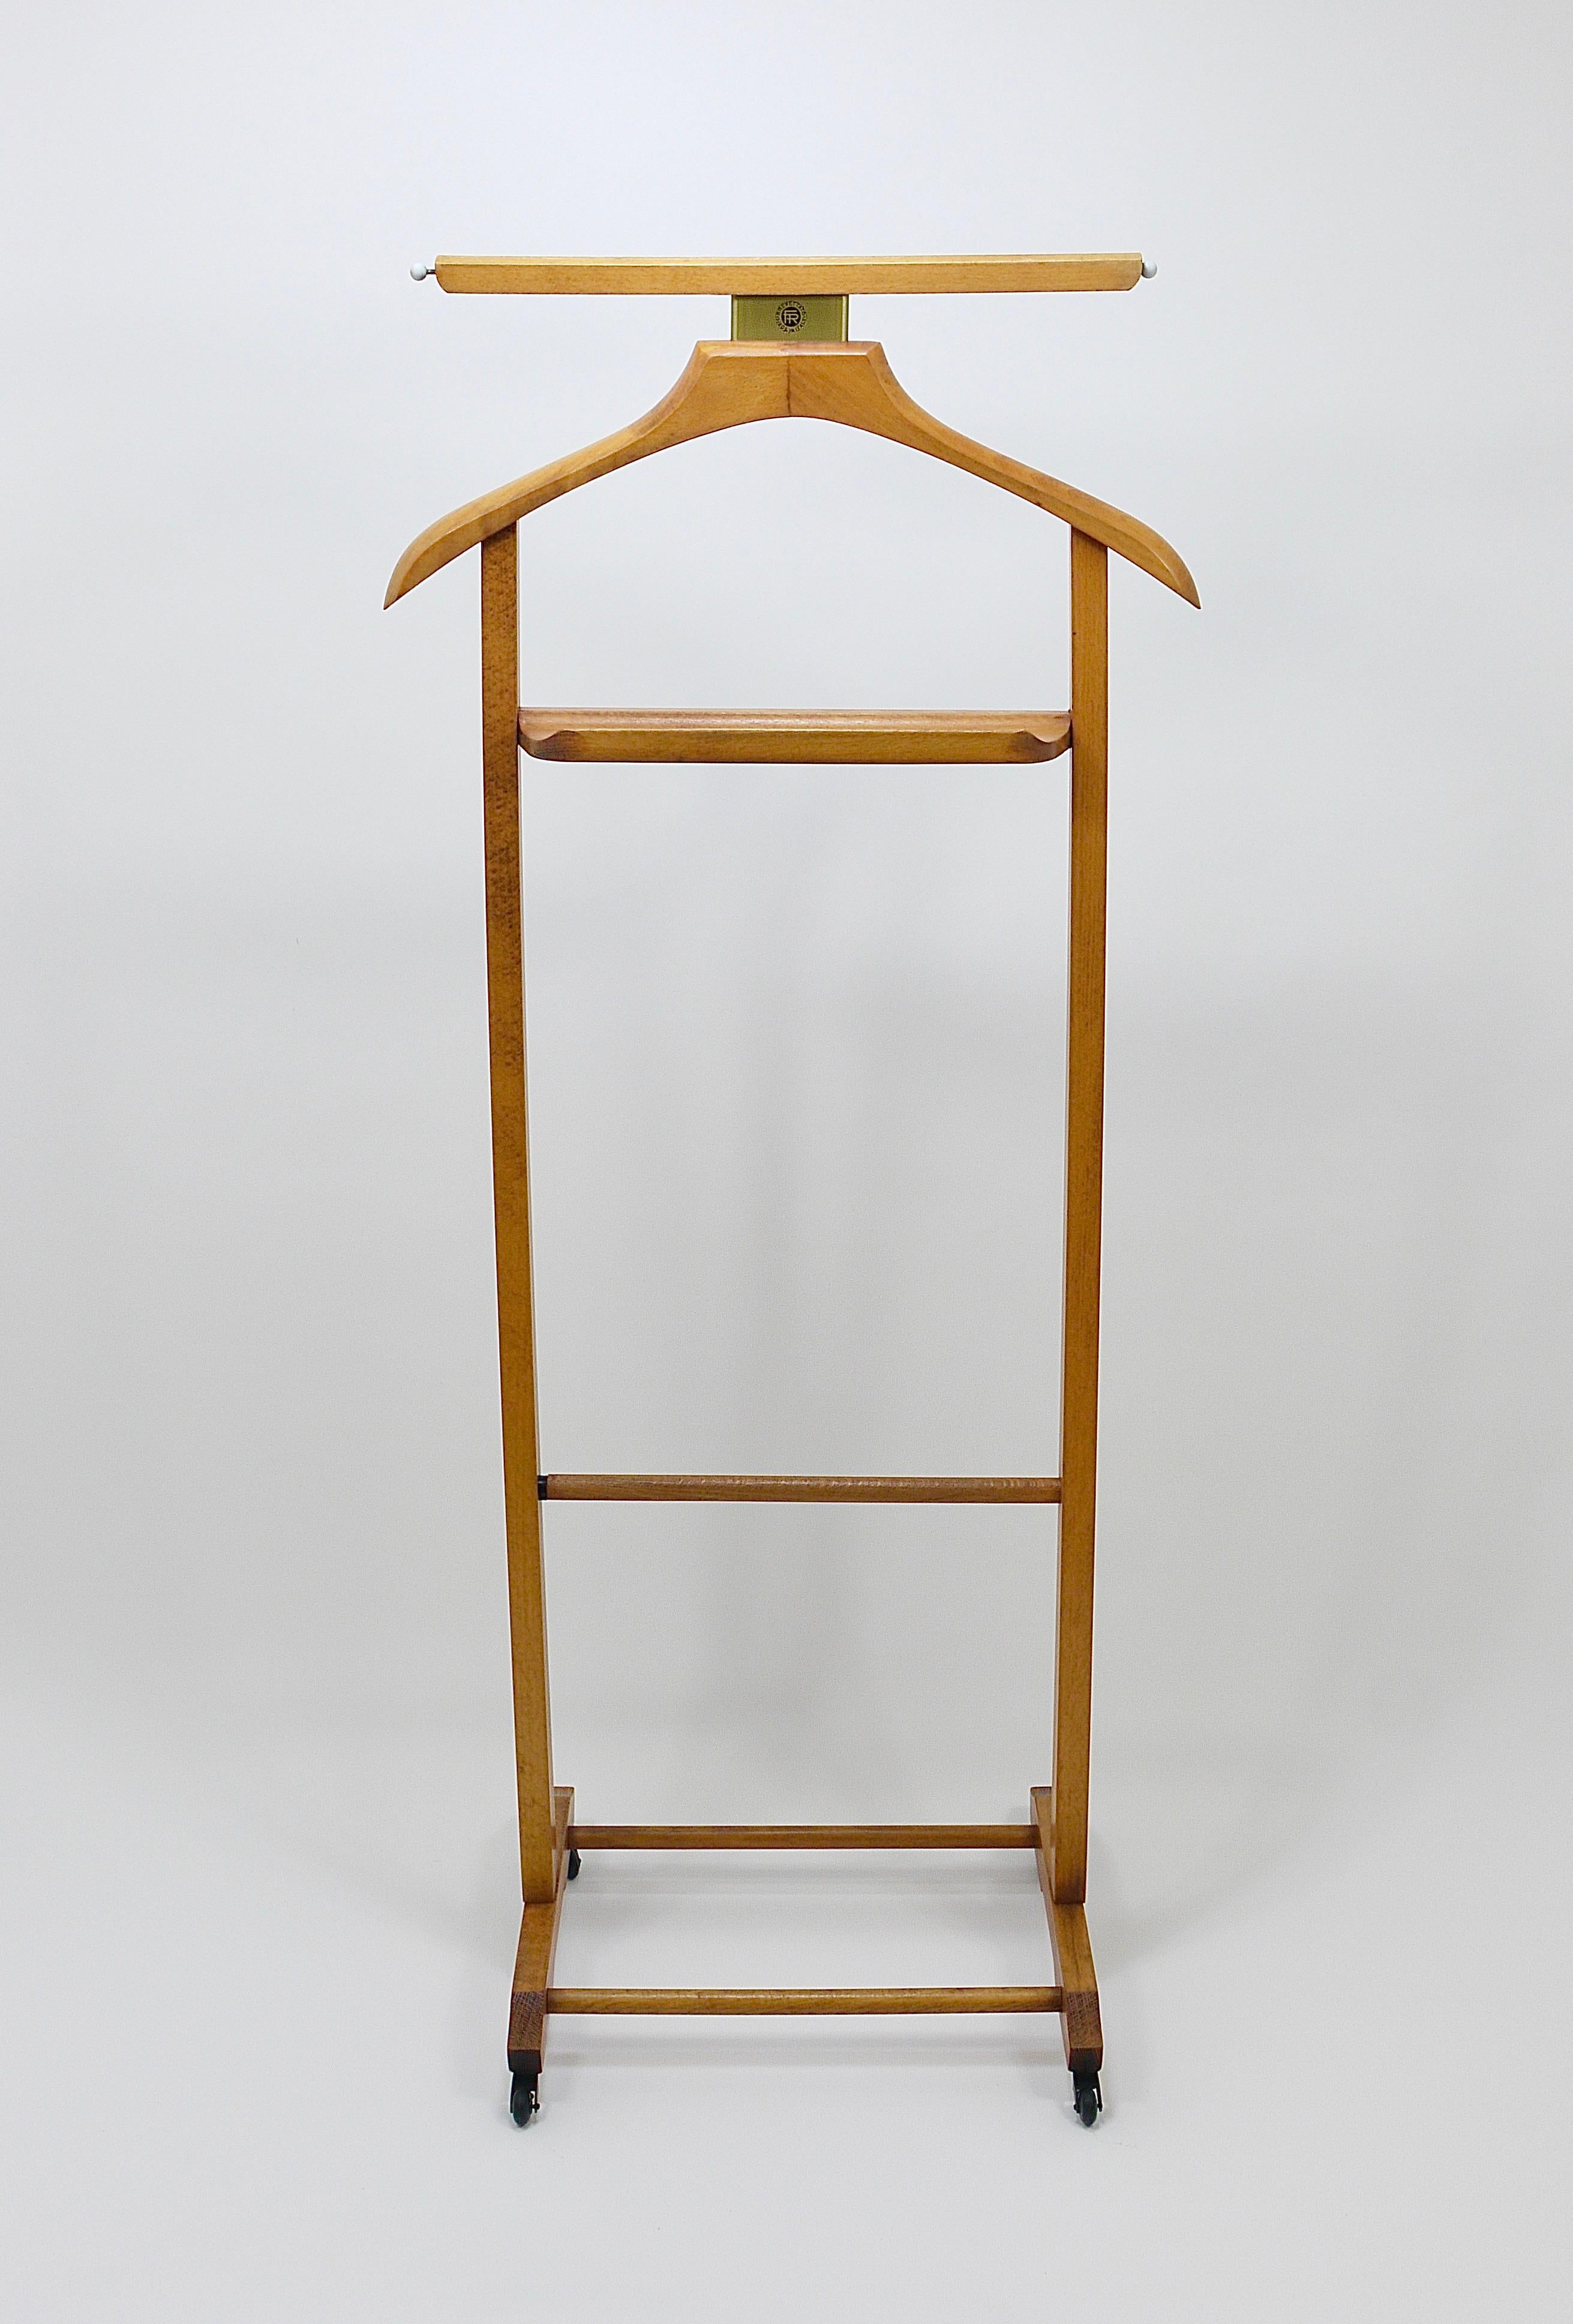 A sculptural Modernist valet clothing stand for both ladies and gentlemen, dating from the 1950s, in the style of Ico & Luisa Parisi. Executed by Fratelli Reguitti, Italy. Crafted from beech wood in a medium brown color, it features an elegant satin